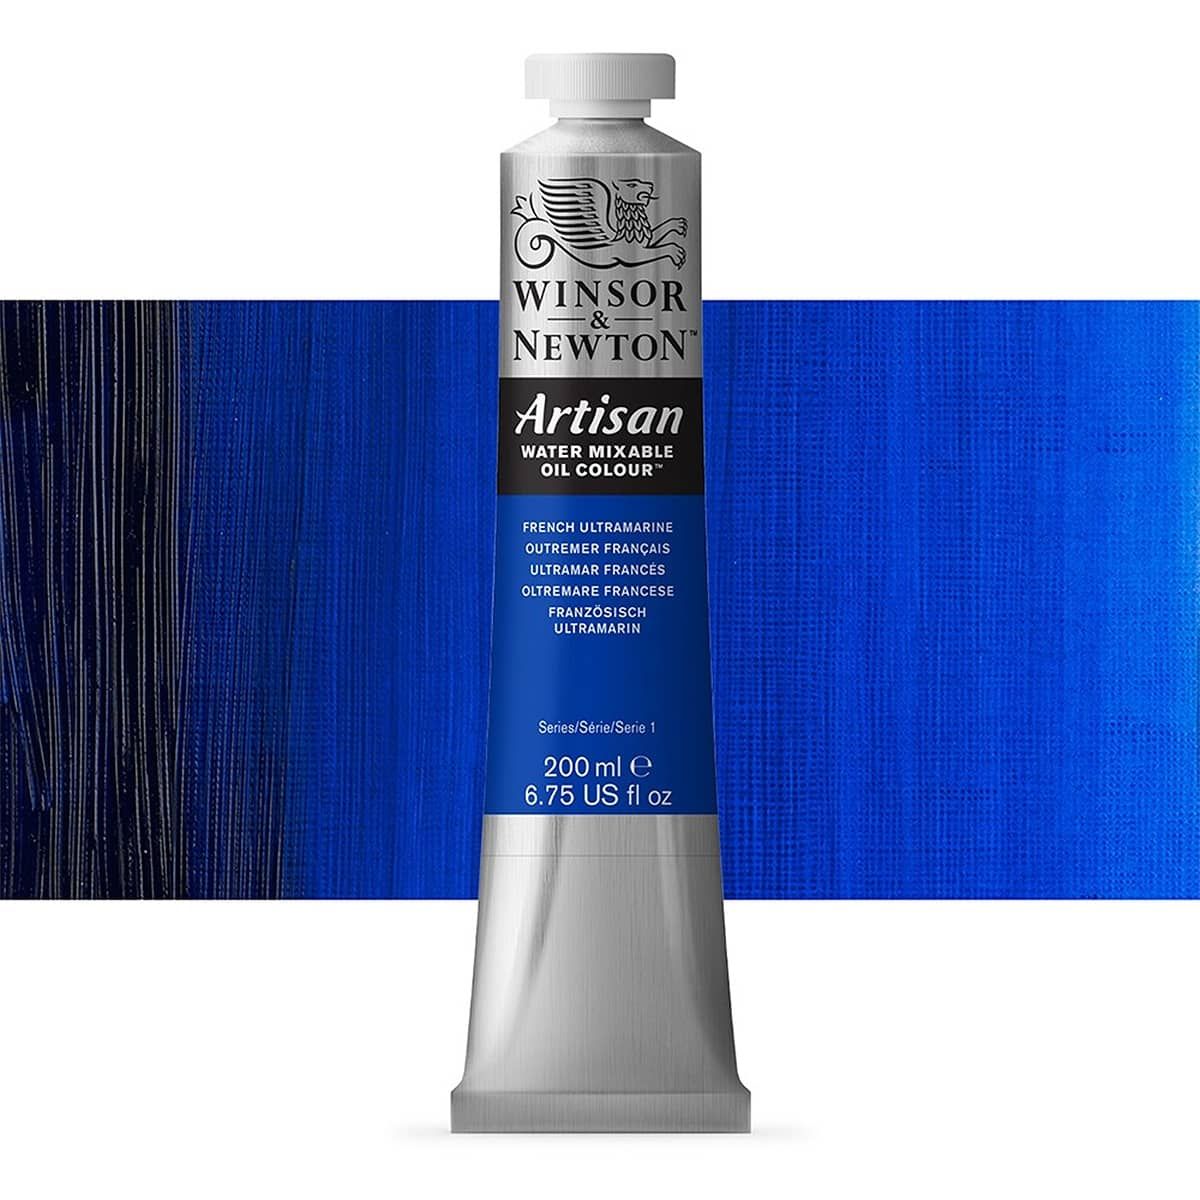 200ml Artisan Water Mixable Oil Colors